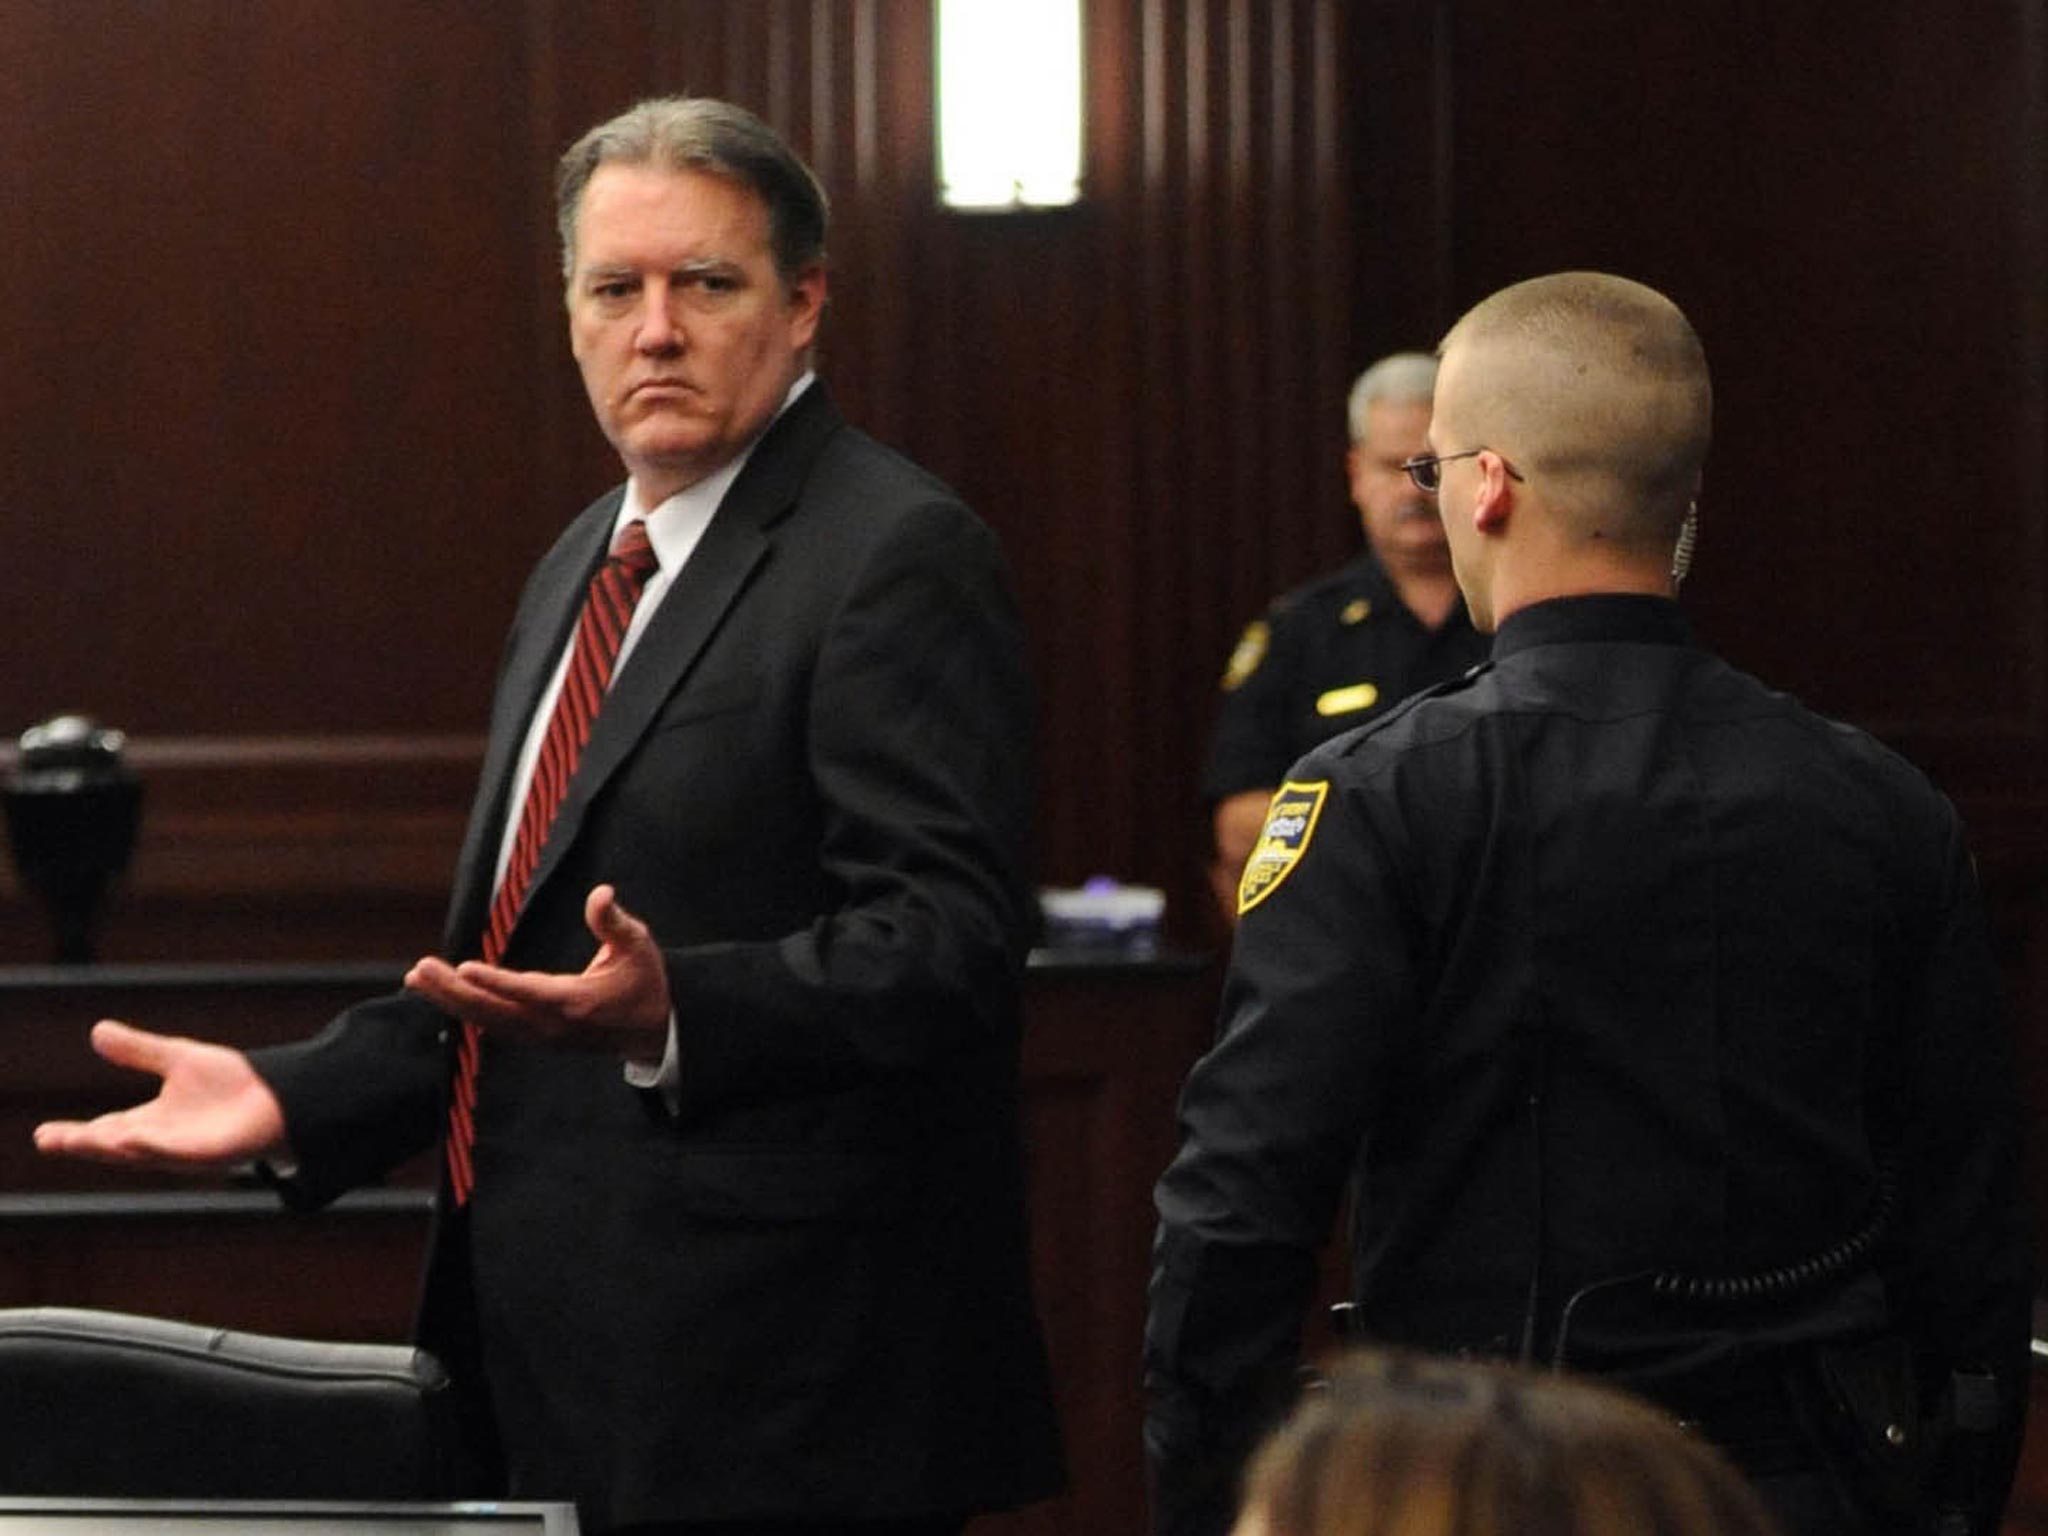 Michael Dunn reacts to the verdict in his trial for the murder of Jordan Davis